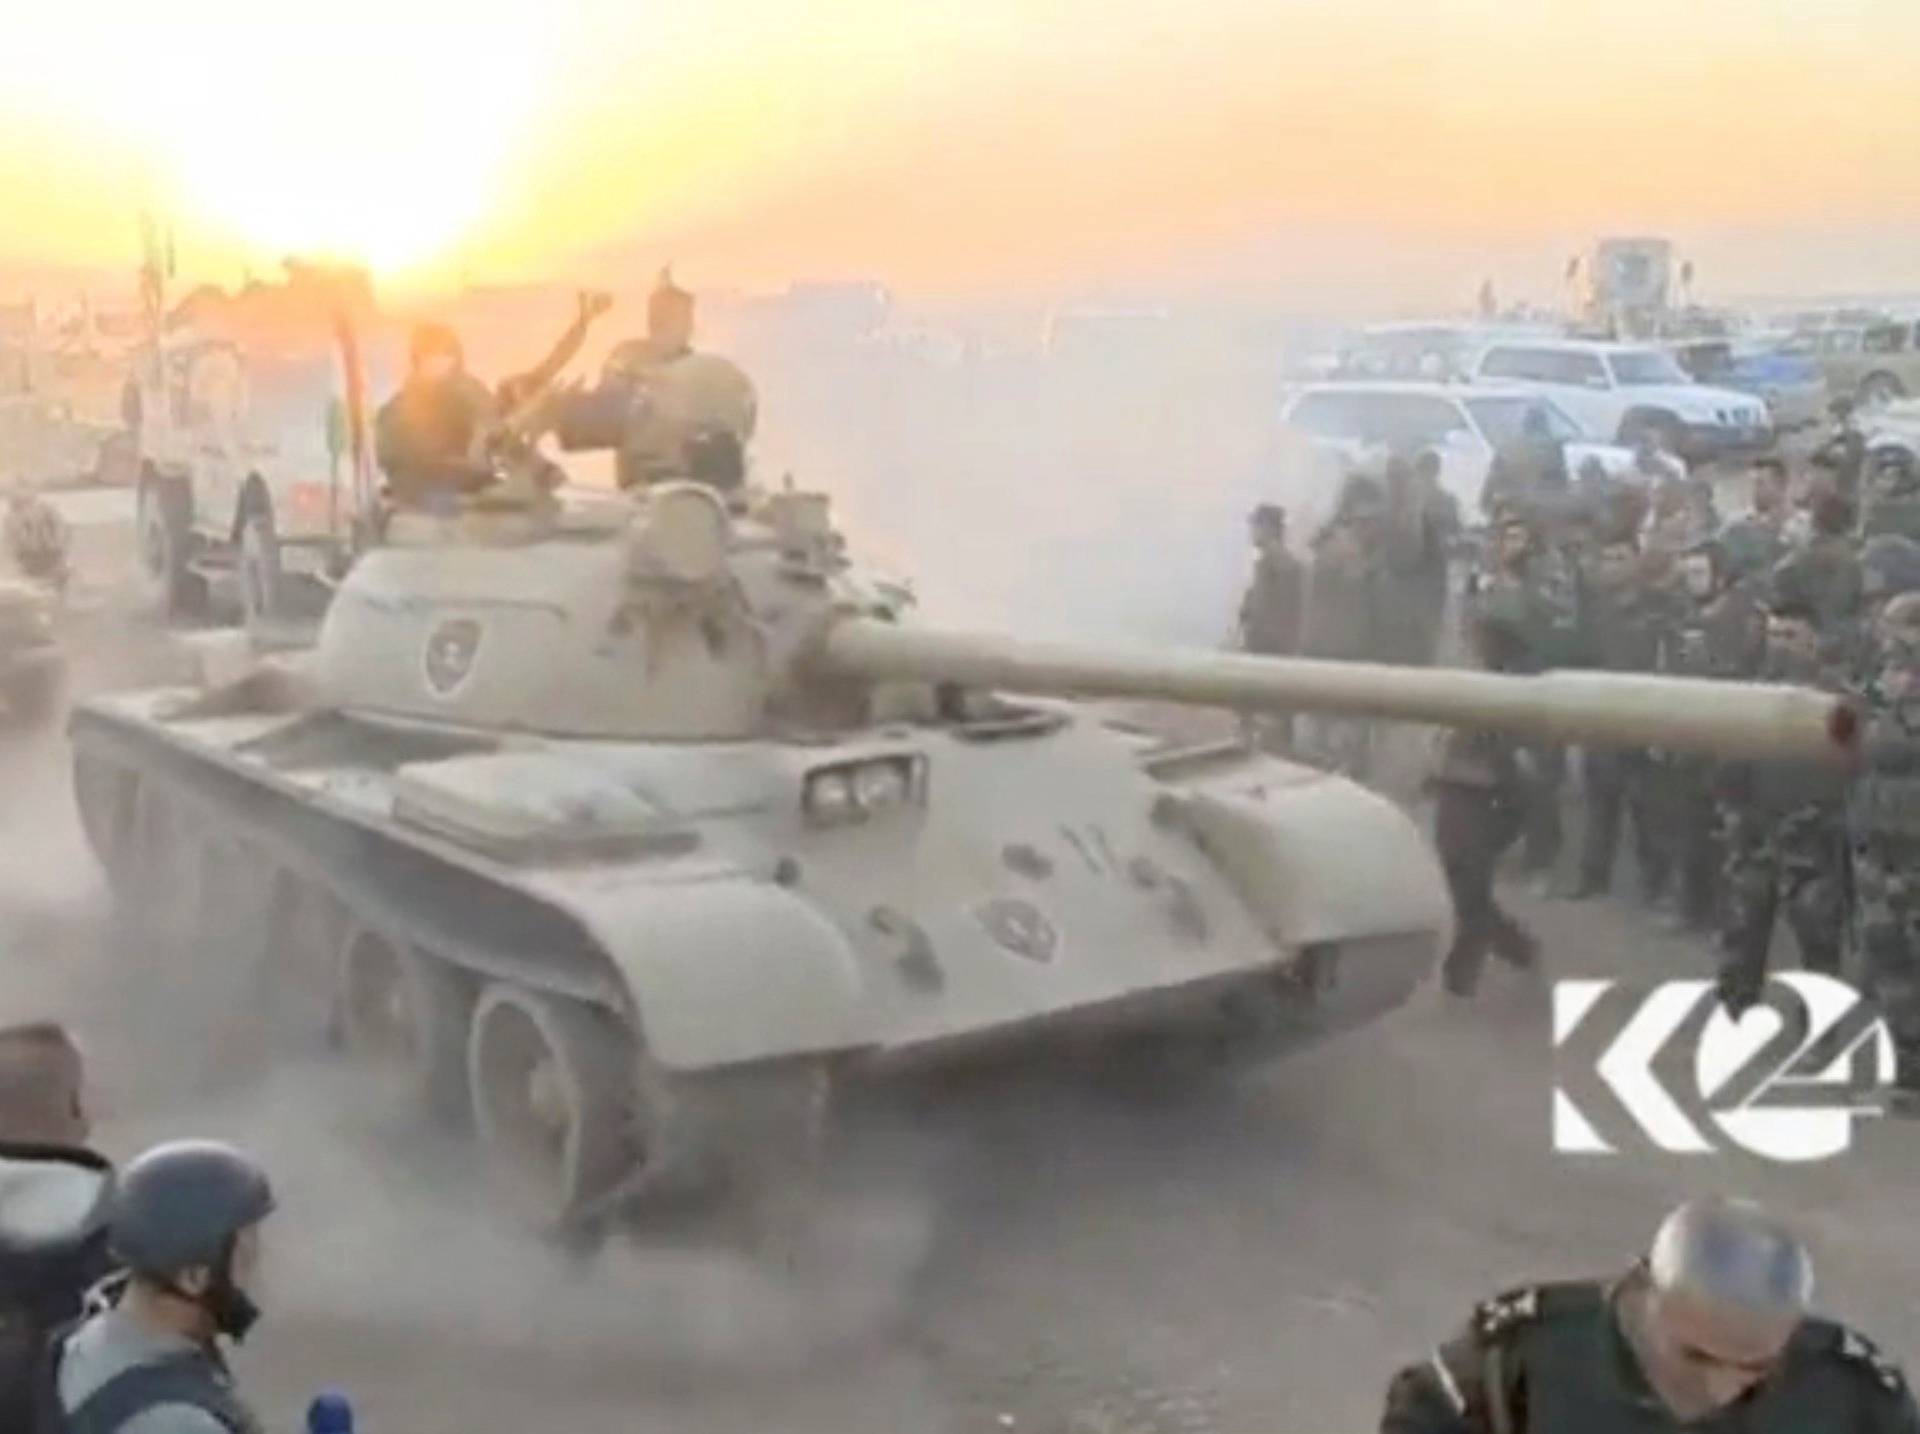 Tanks move past soldiers in military fatigues as the sun begins to set east of Mosul, where the Iraqi government launched a U.S.-backed offensive to drive Islamic State from the northern city, in this still image taken from video